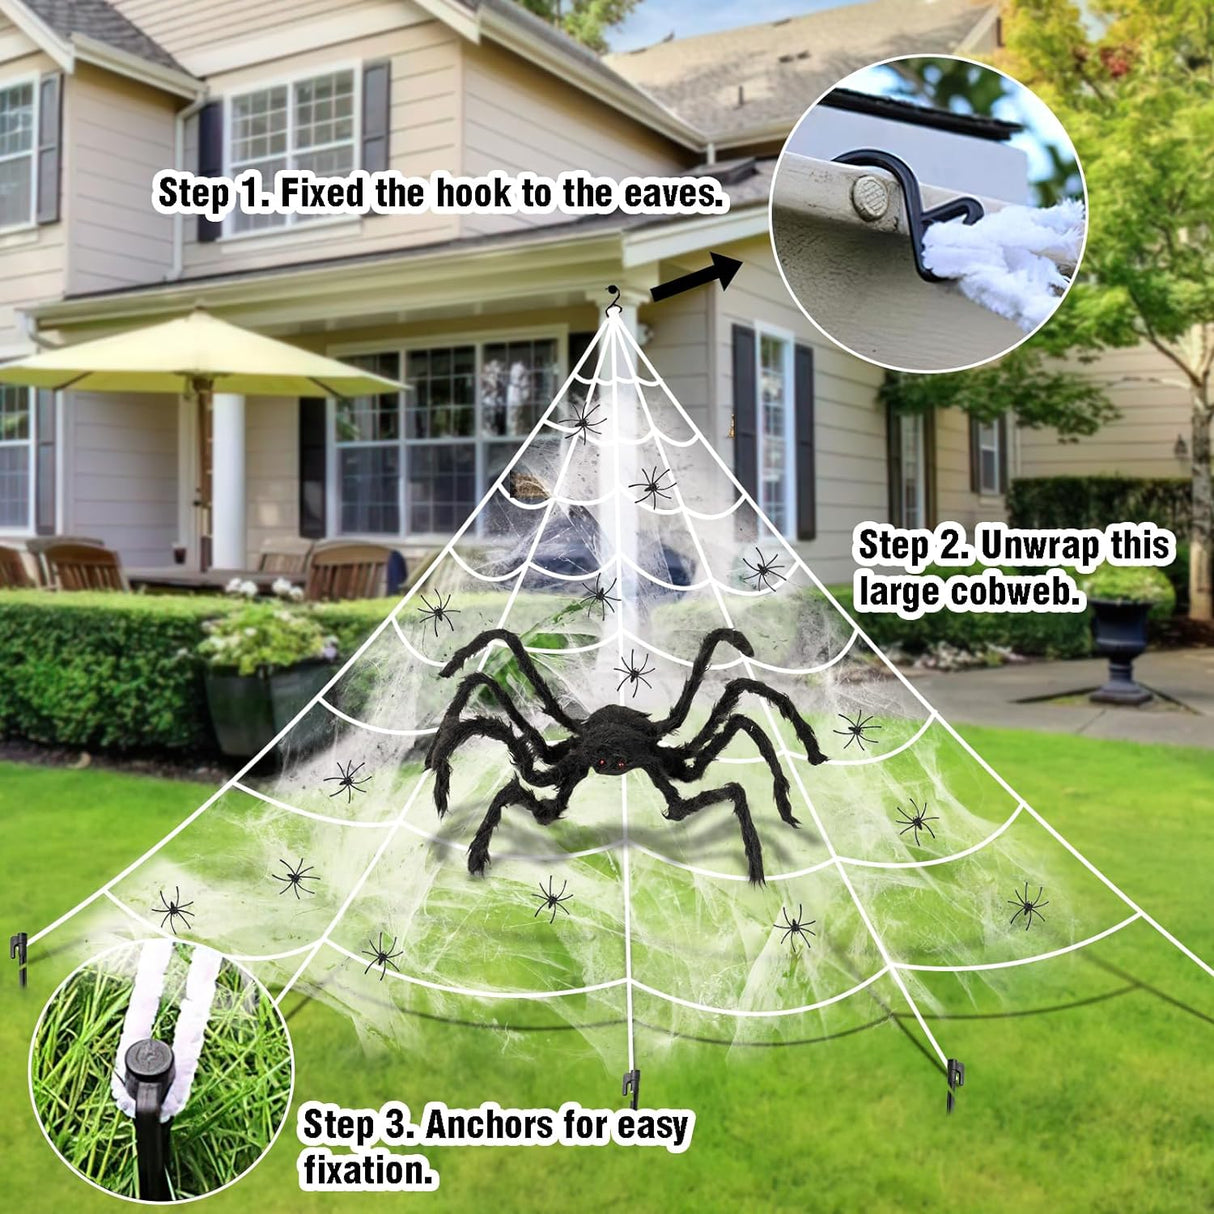 Spider Web Halloween Decoration Outdoor - 16.4Ft Giant Spider Web with Blue Lights, 40G Stretch Spiderweb and 36“ Black Spider for Scary Halloween Yard Garage Lights Outdoor Decorations